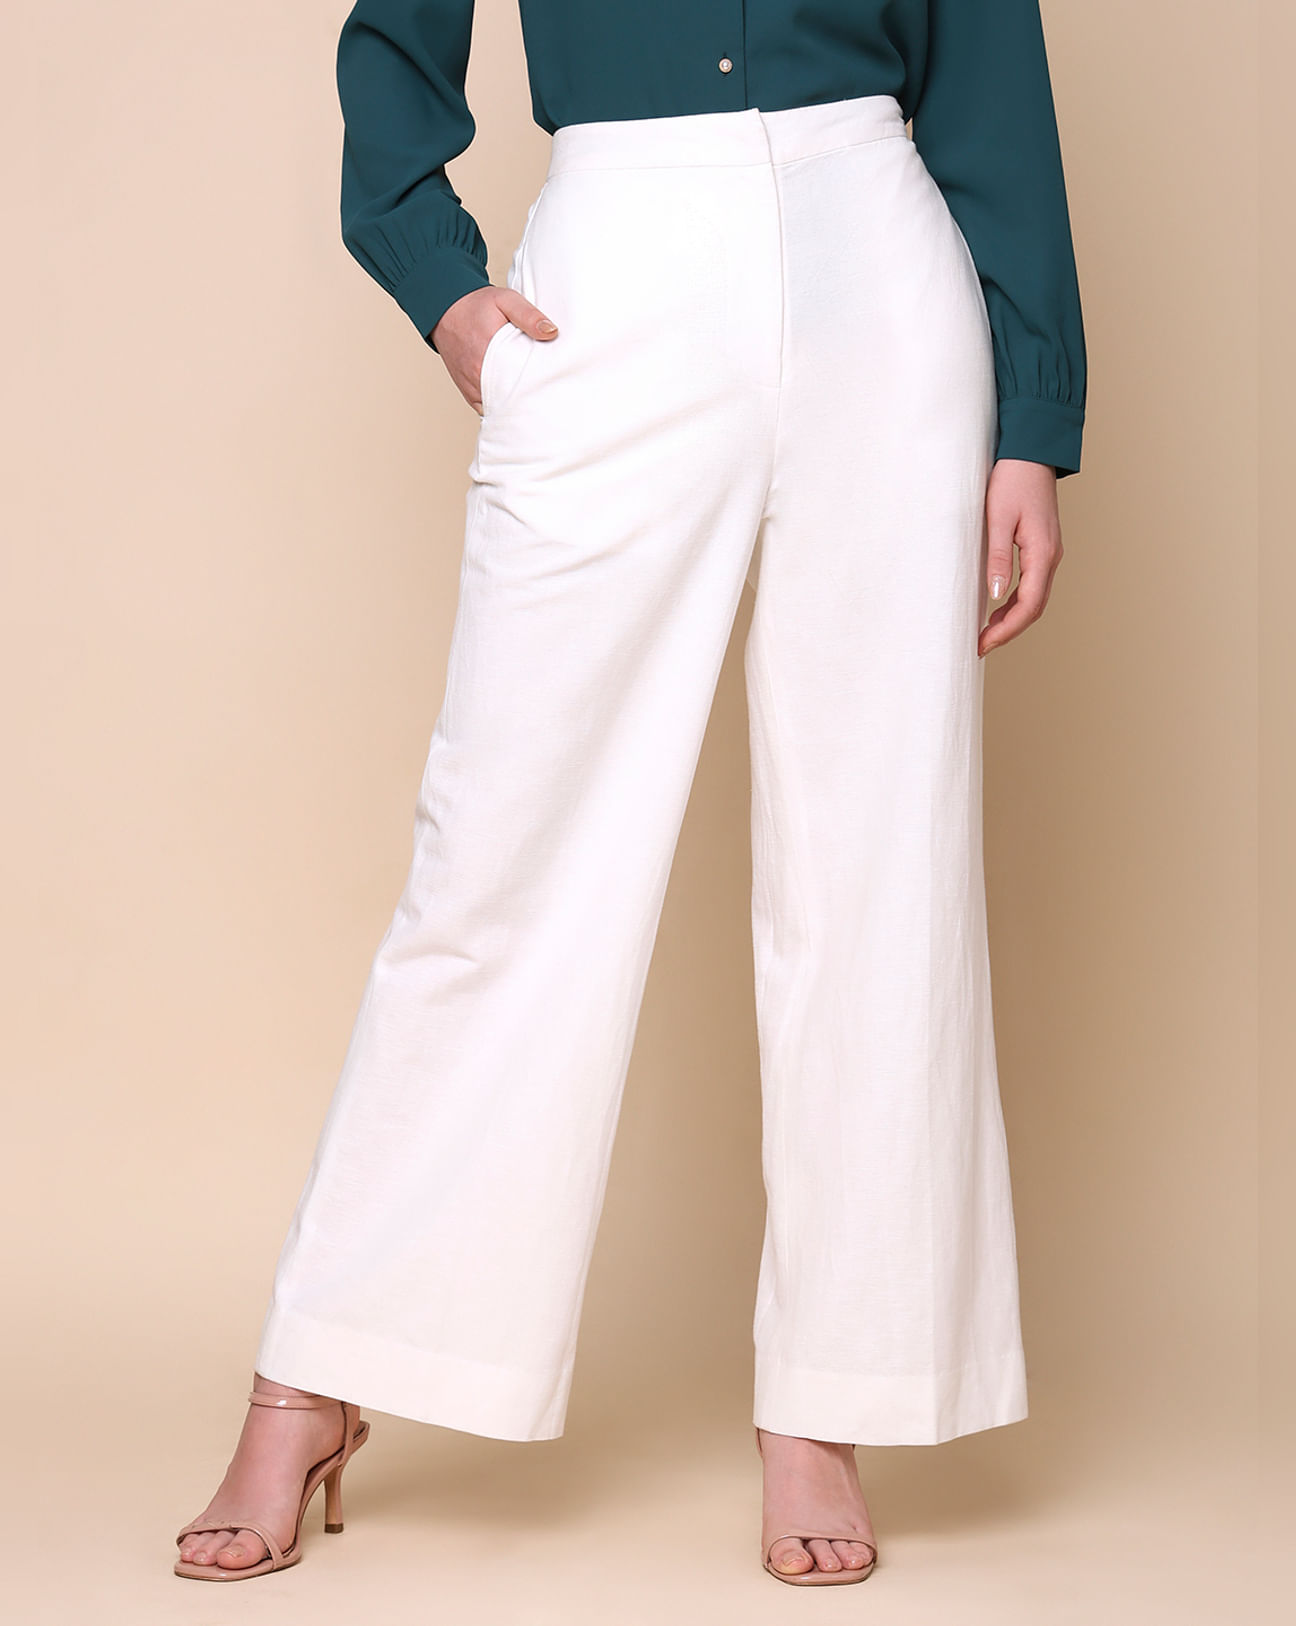 White Mid Rise Pants Flared